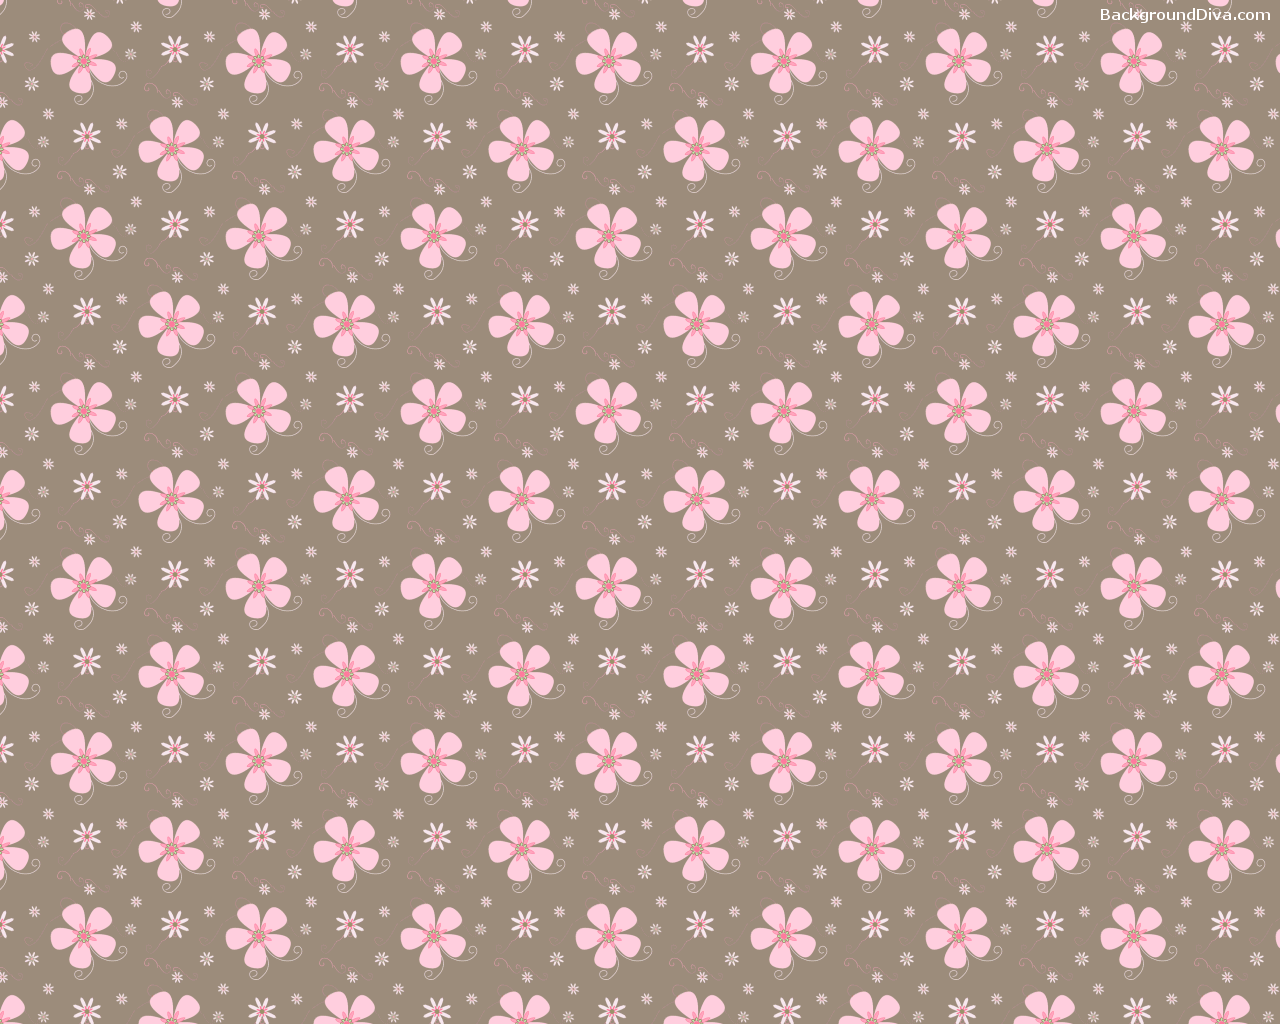 Pink And Brown Flower Wallpaper A Desktop Background With R U